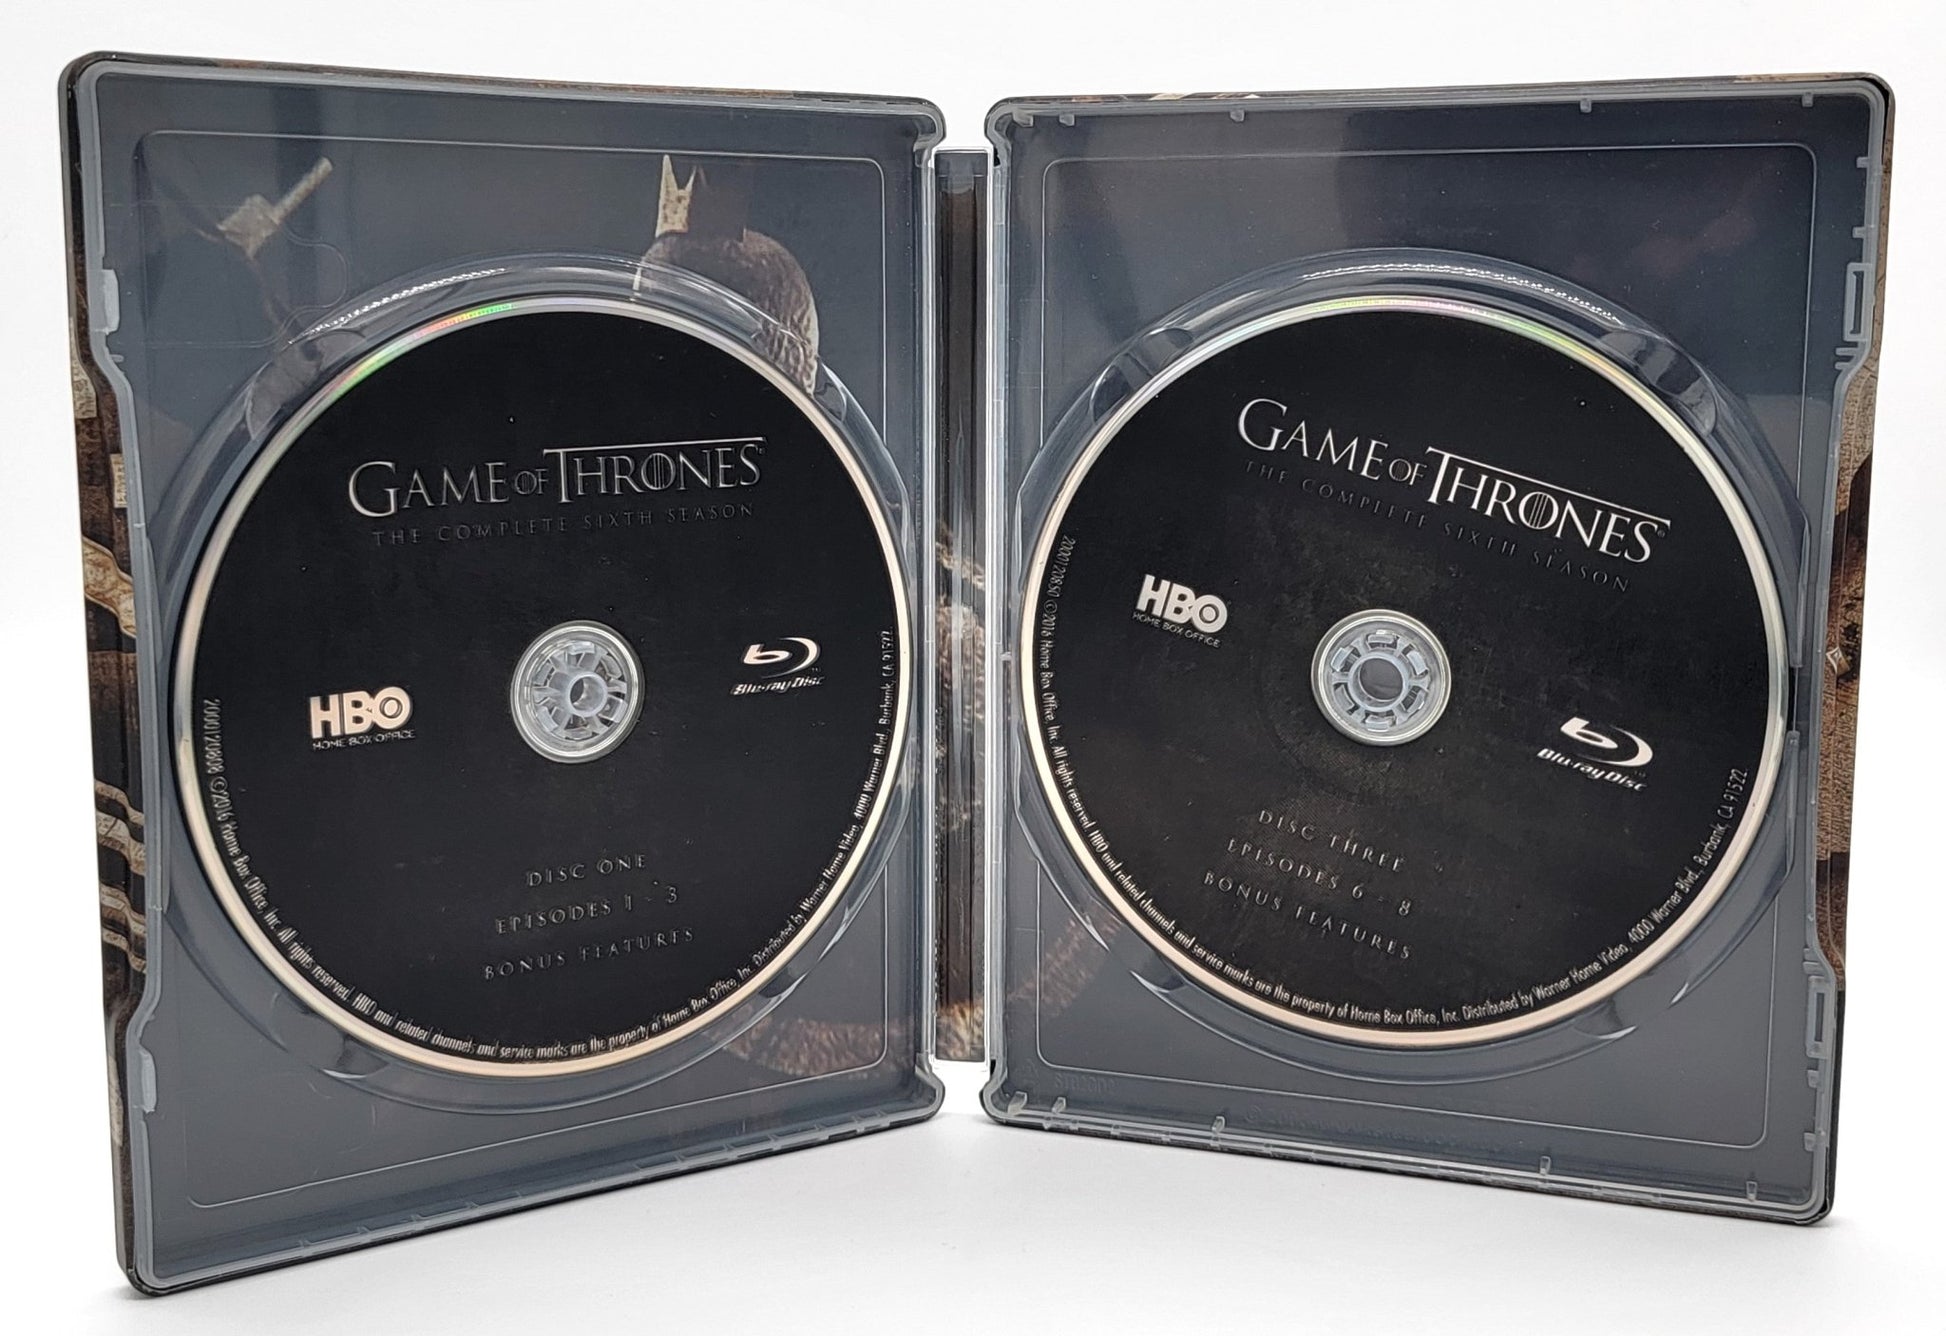 HBO Home Entertainment - Steel Book Game of Thrones - Braavos - The Complete Sixth Season | Blu Ray - 4 Disc Set - Limited Edition Collectors Tin - Blu-ray - Steady Bunny Shop